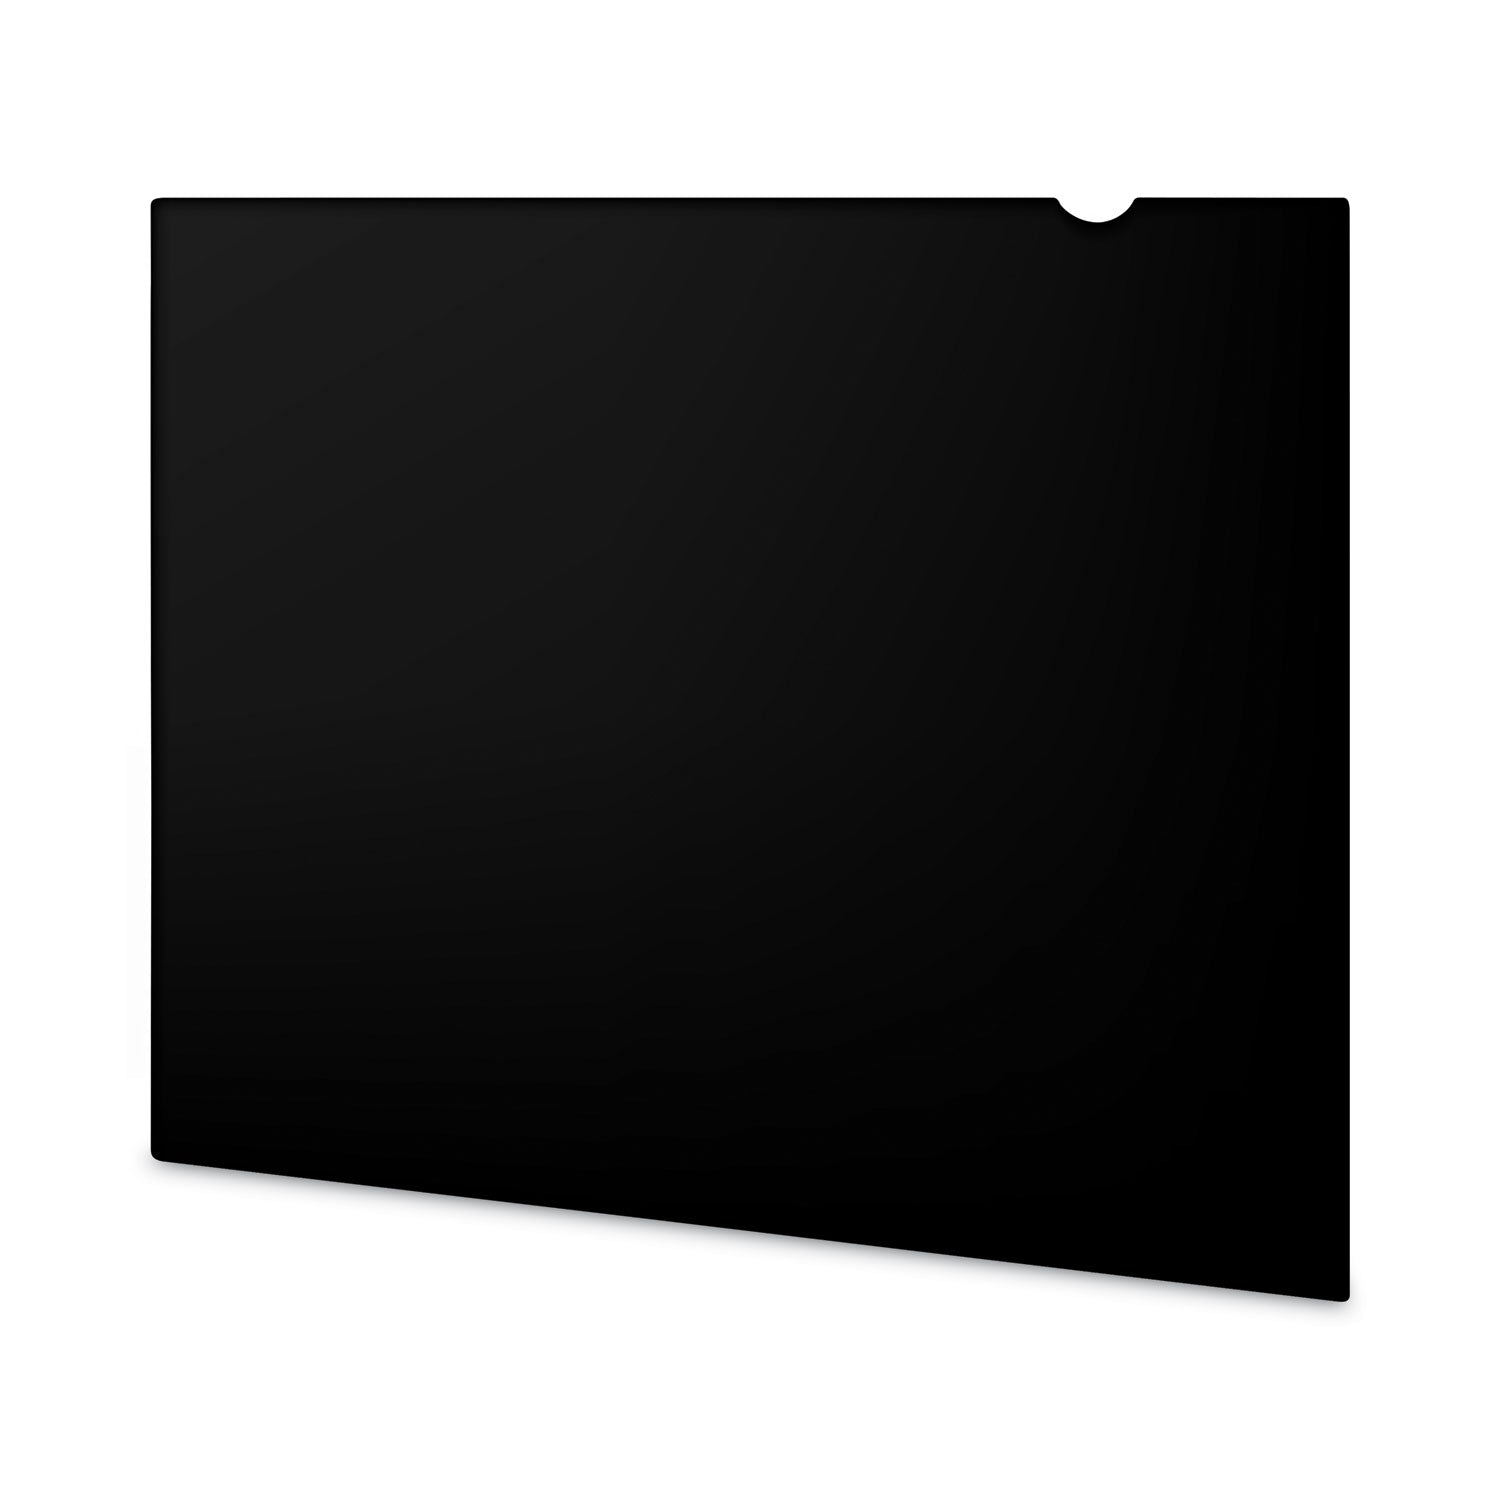 Blackout Privacy Filter for 20" Widescreen Flat Panel Monitor, 16:9 Aspect Ratio - 